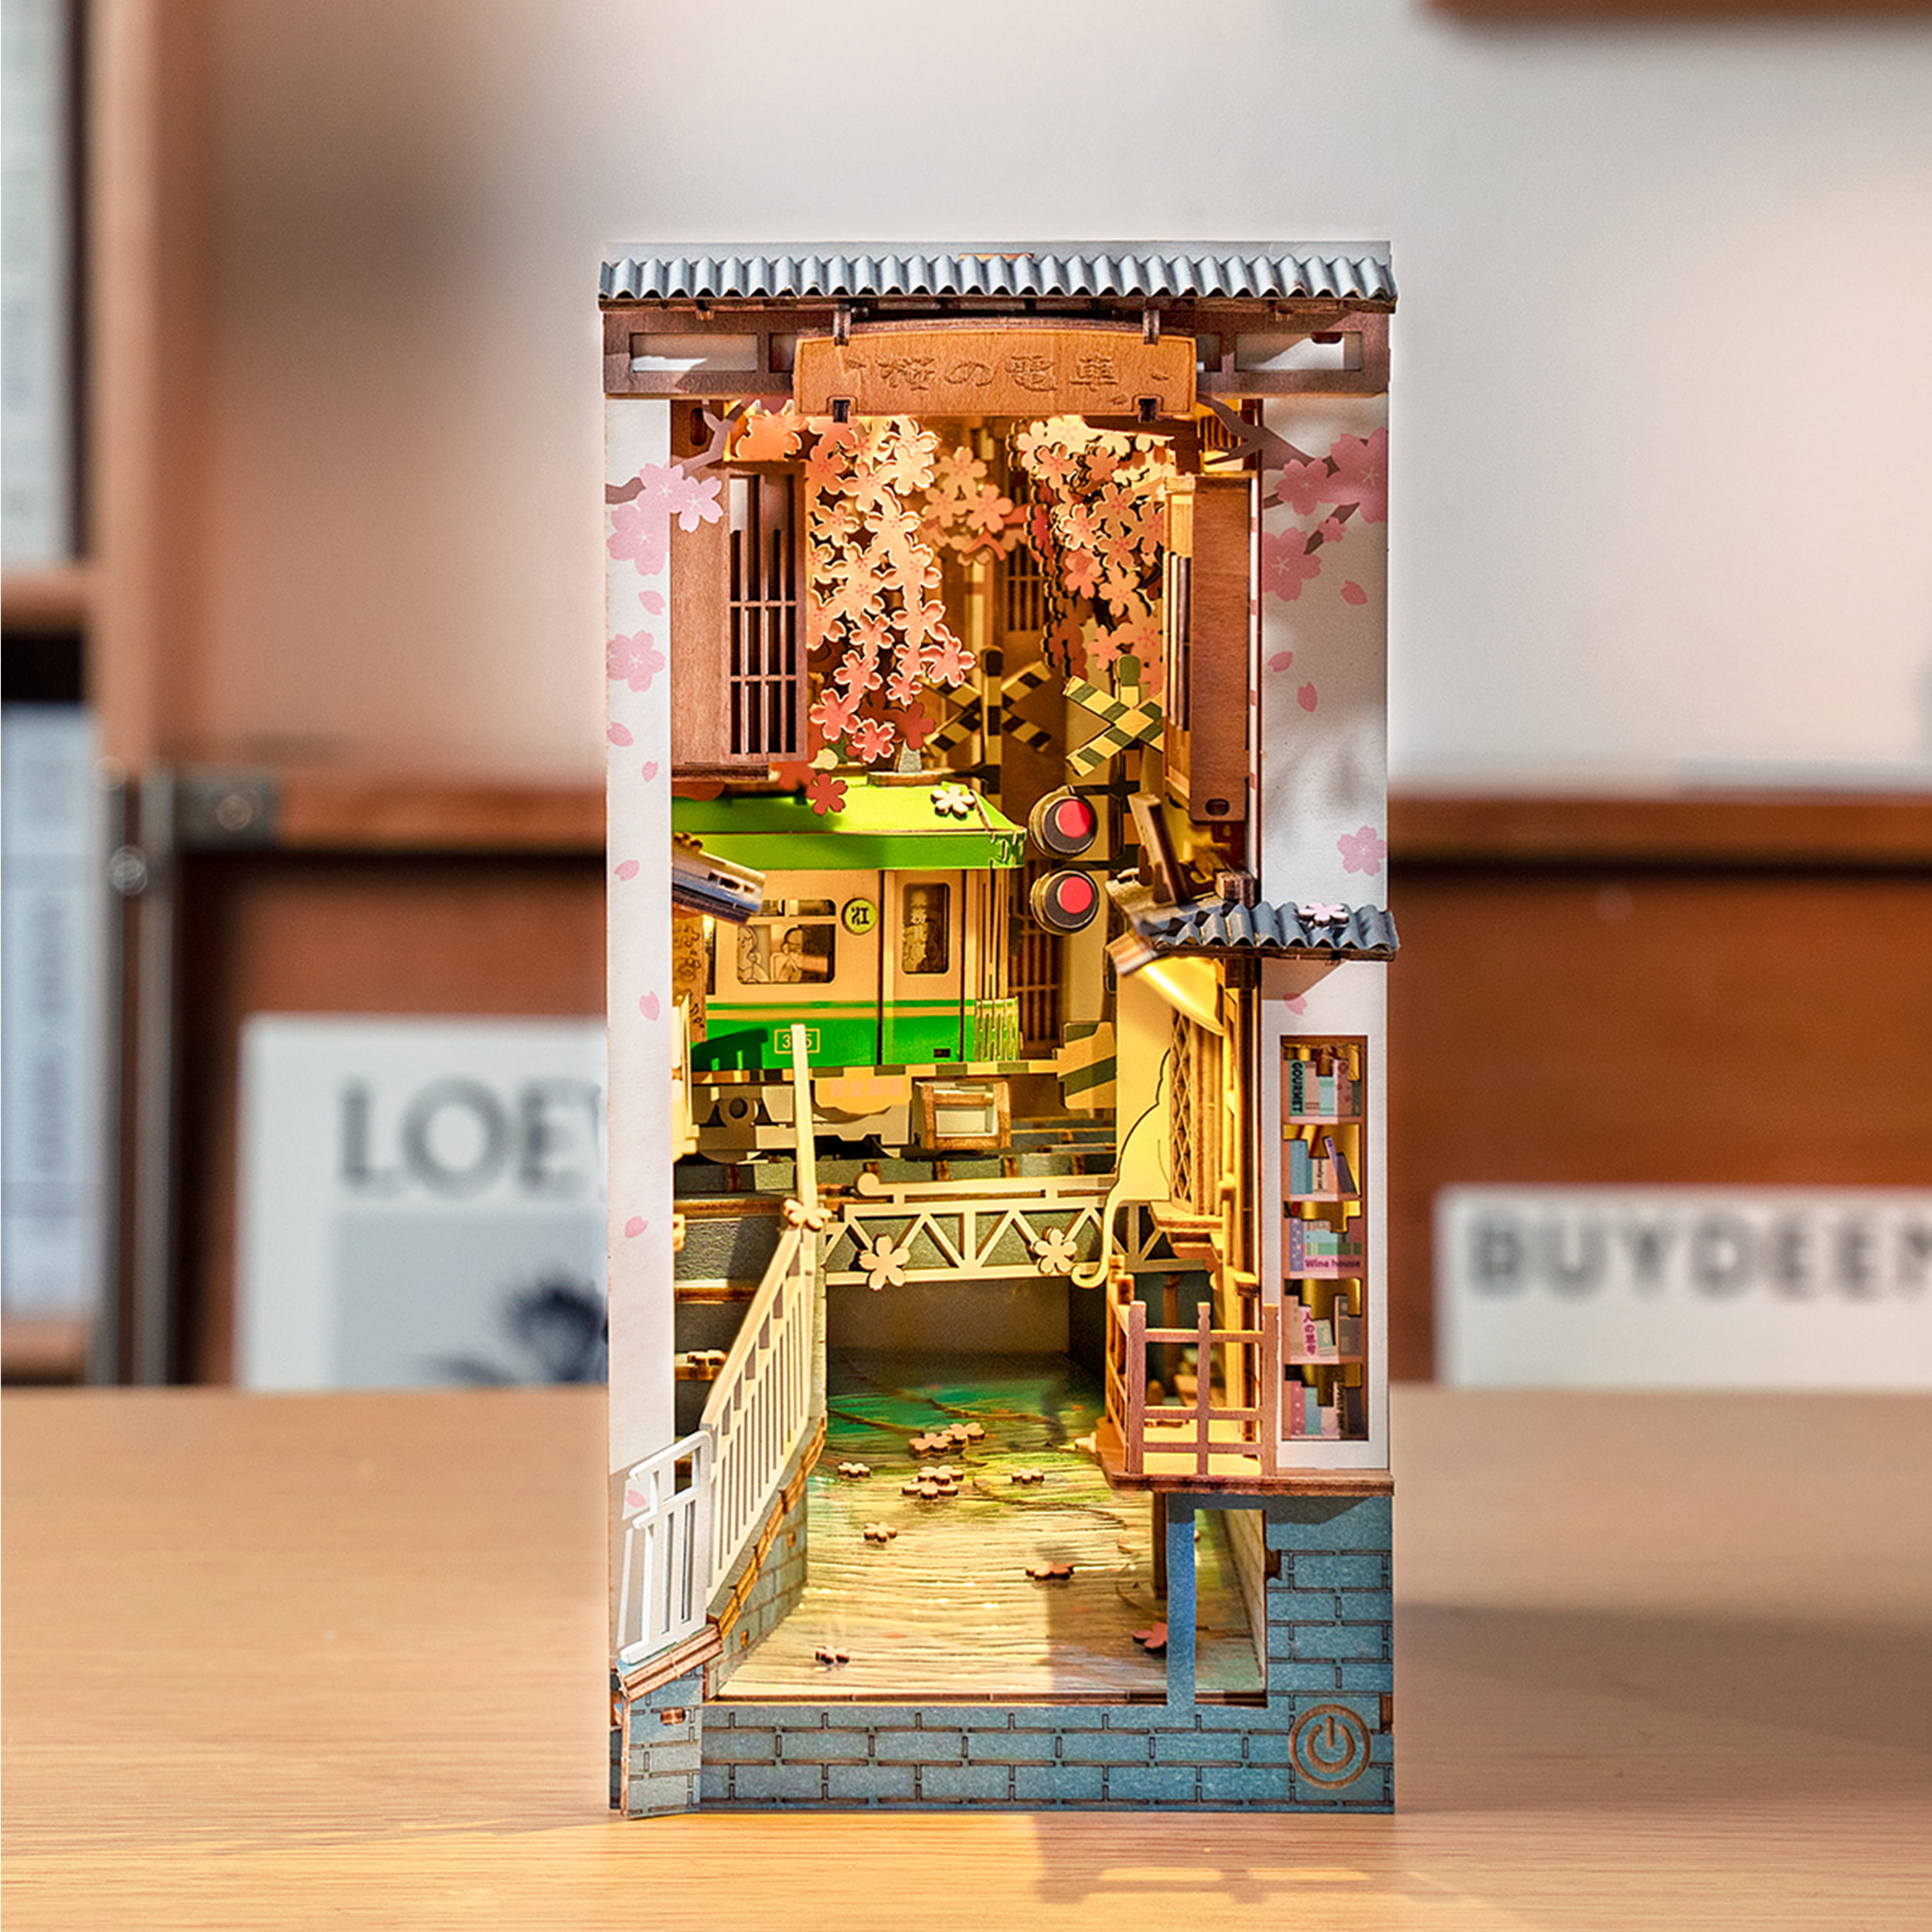  Book Nook Box DIY 3D Wooden Puzzles Dollhouse Bookshelf Insert  Diorama Decor Alley Little Mermaid Personalized Assembled Bookends  Build-Creativity Kit with LED Light for Teens and Adults : Toys & Games